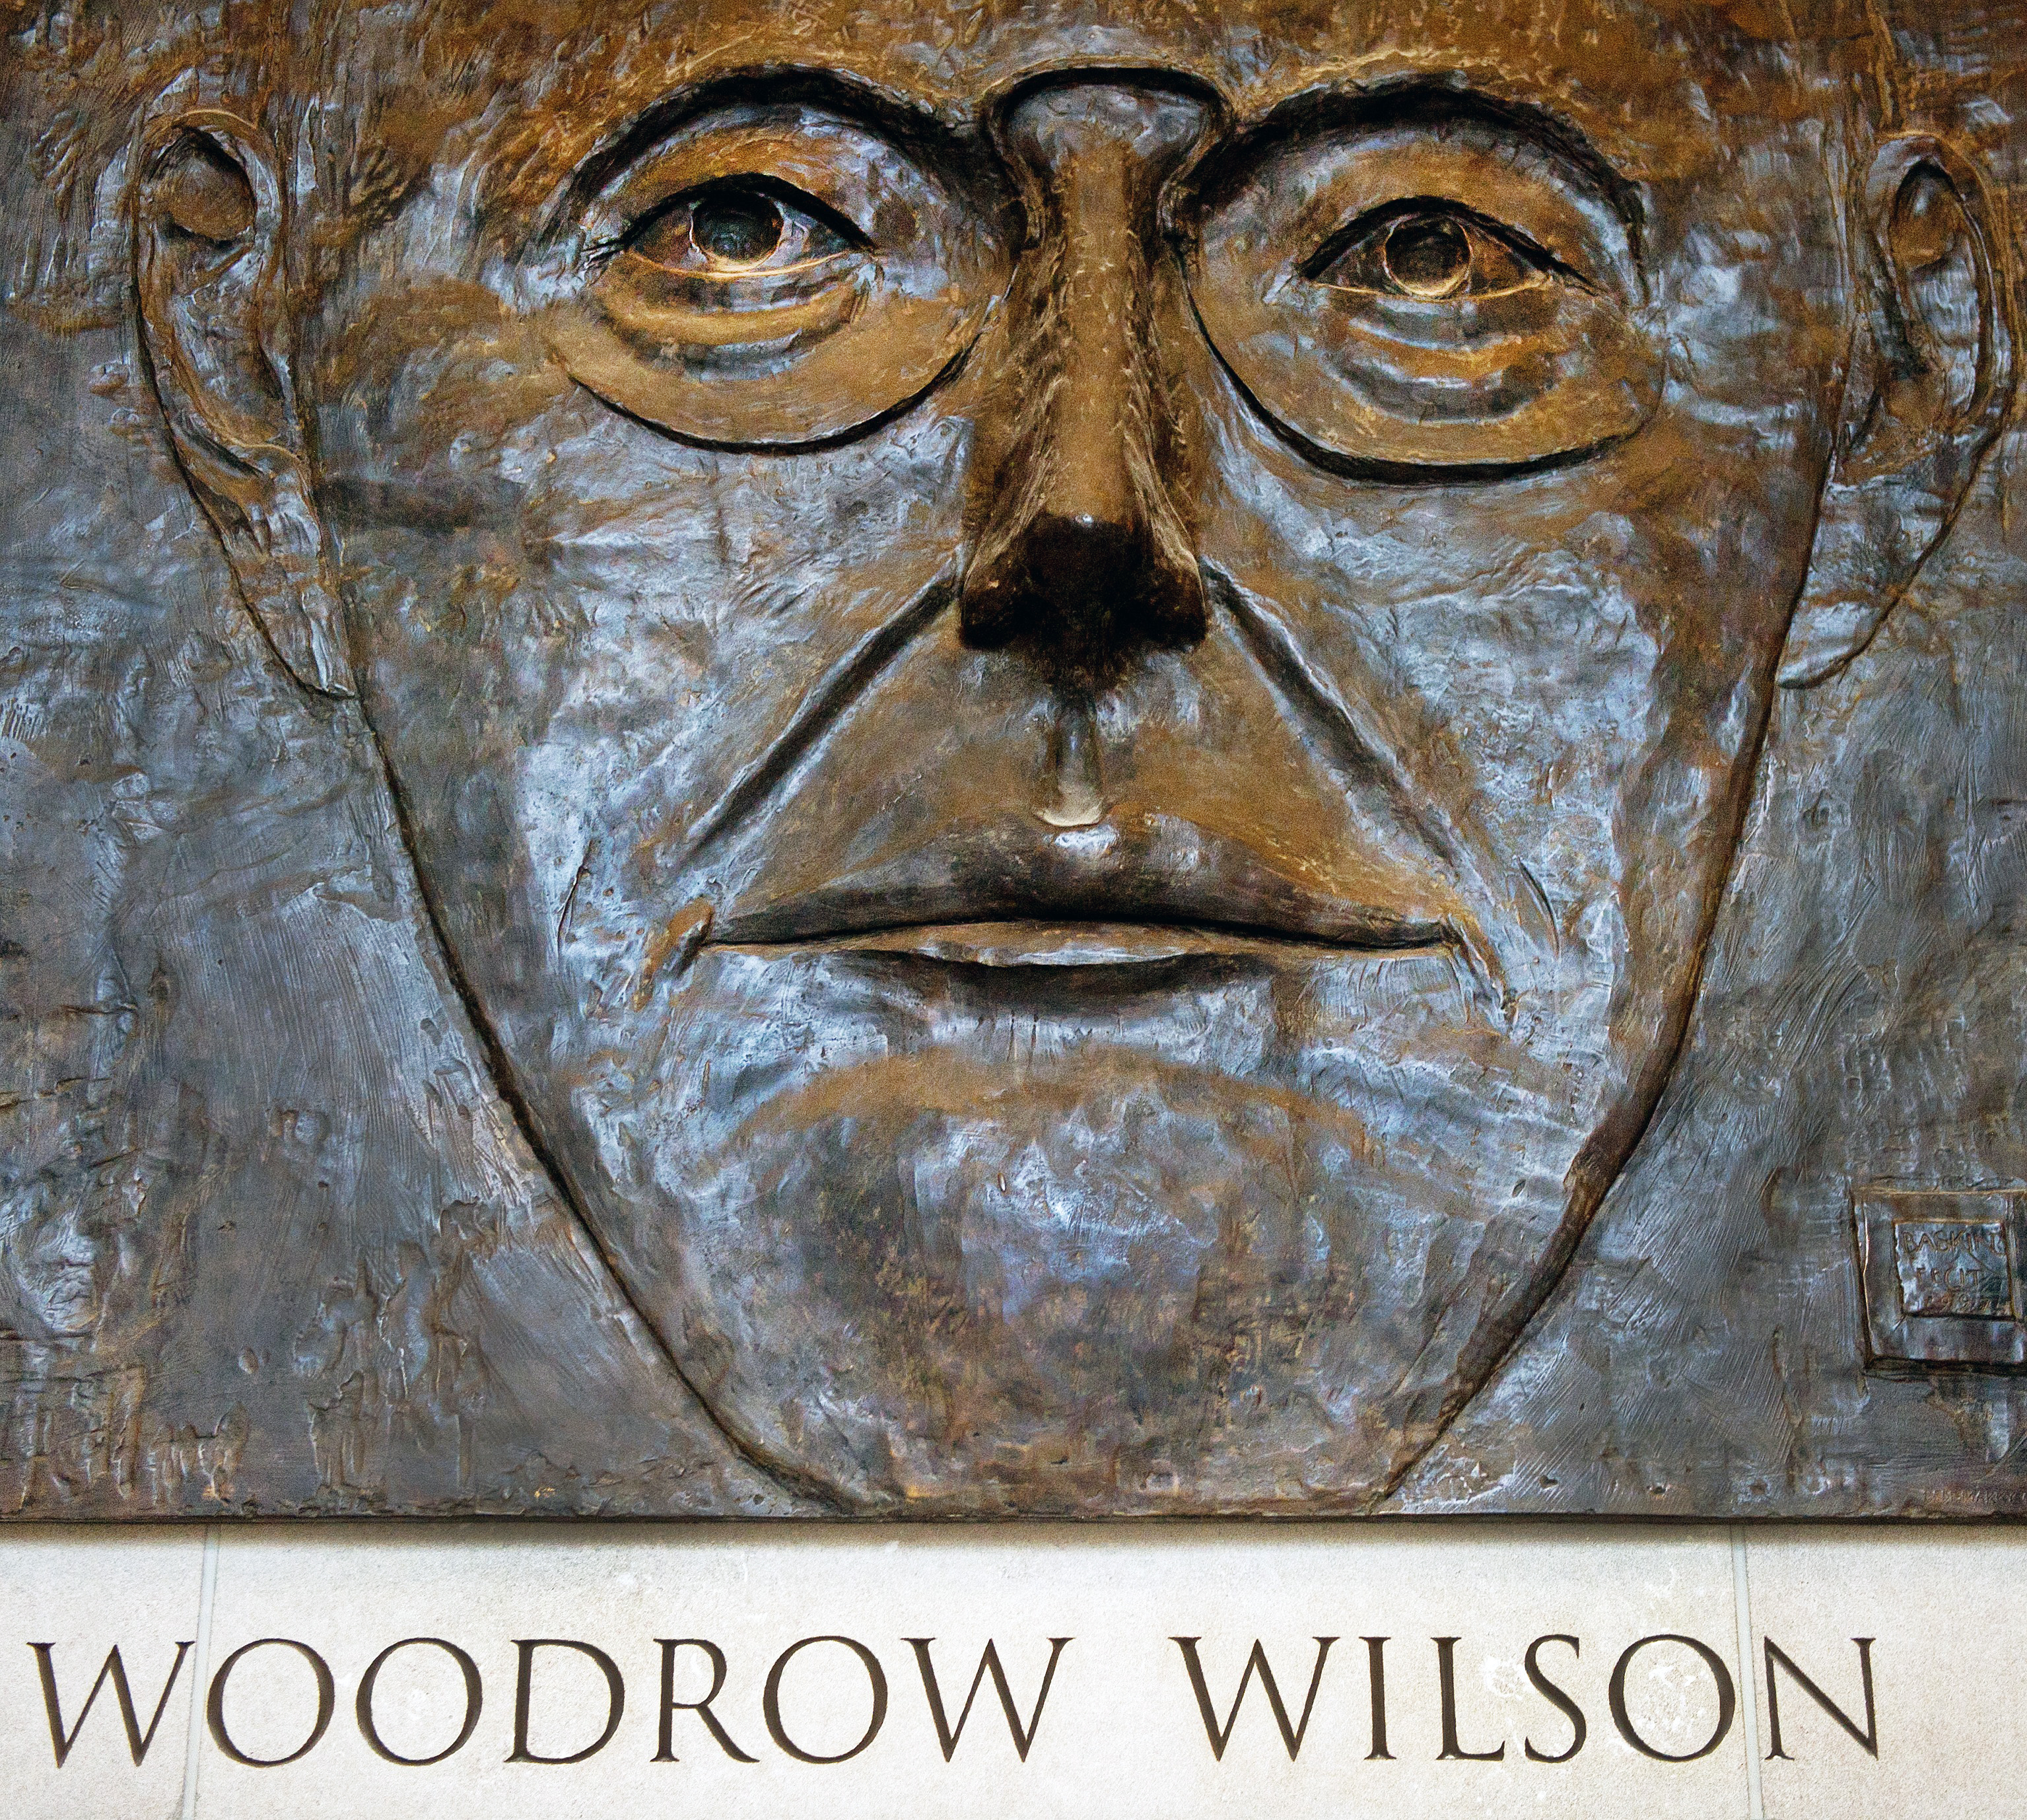 A three -dimentional Congressionally-authorized memorial bas relief of former US President Woodrow Wilson by artist Leonard Baskin is seen hanging on the wall December 6, 2011, at the Woodrow Wilson International Center for Scholars in Washington, DC.( PAUL J. RICHARDS/AFP via Getty Images)